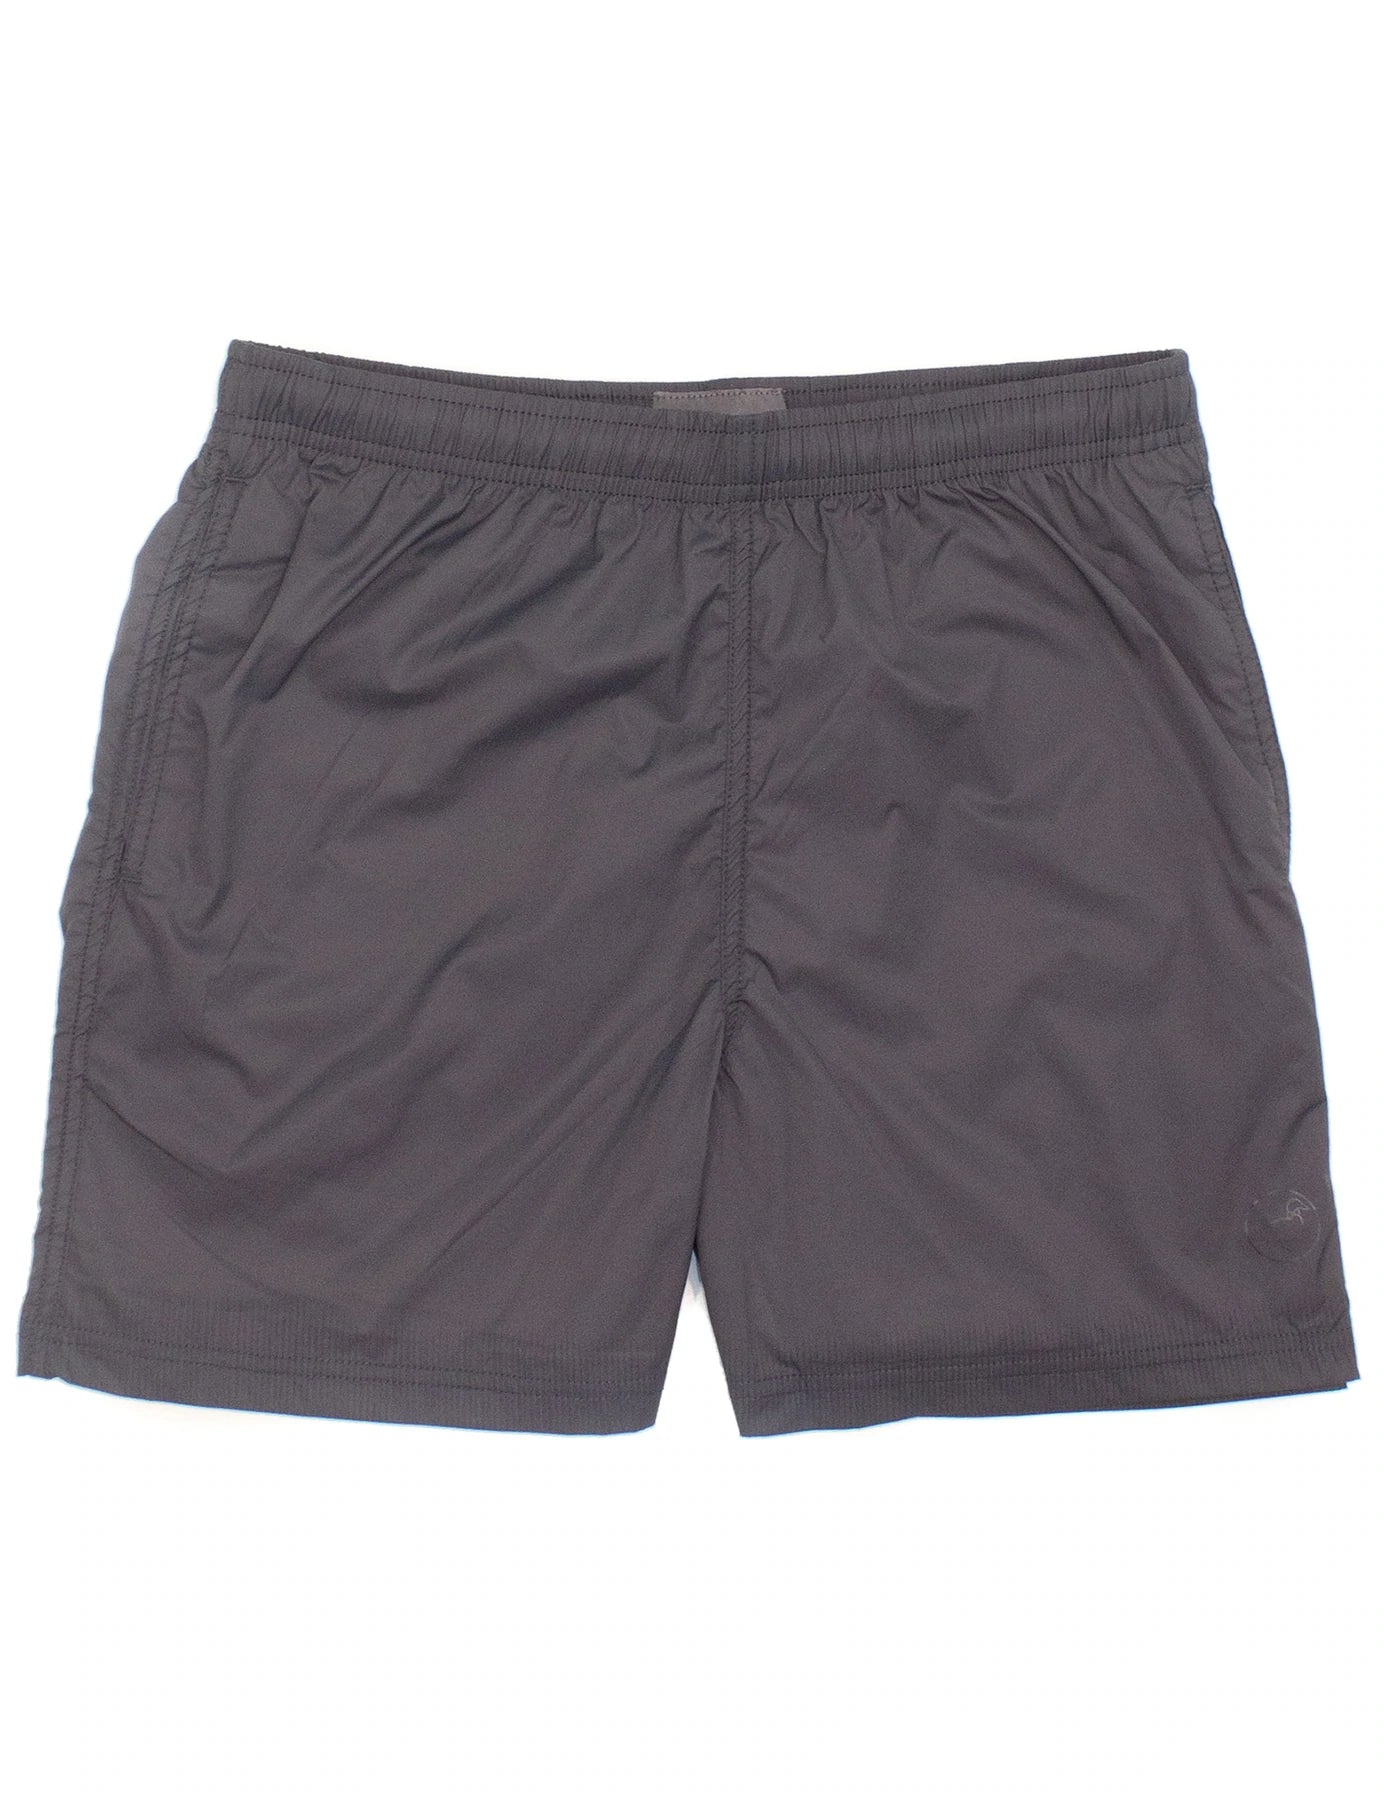 Properly Tied Men's Drifter Performance Shorts-Graphite